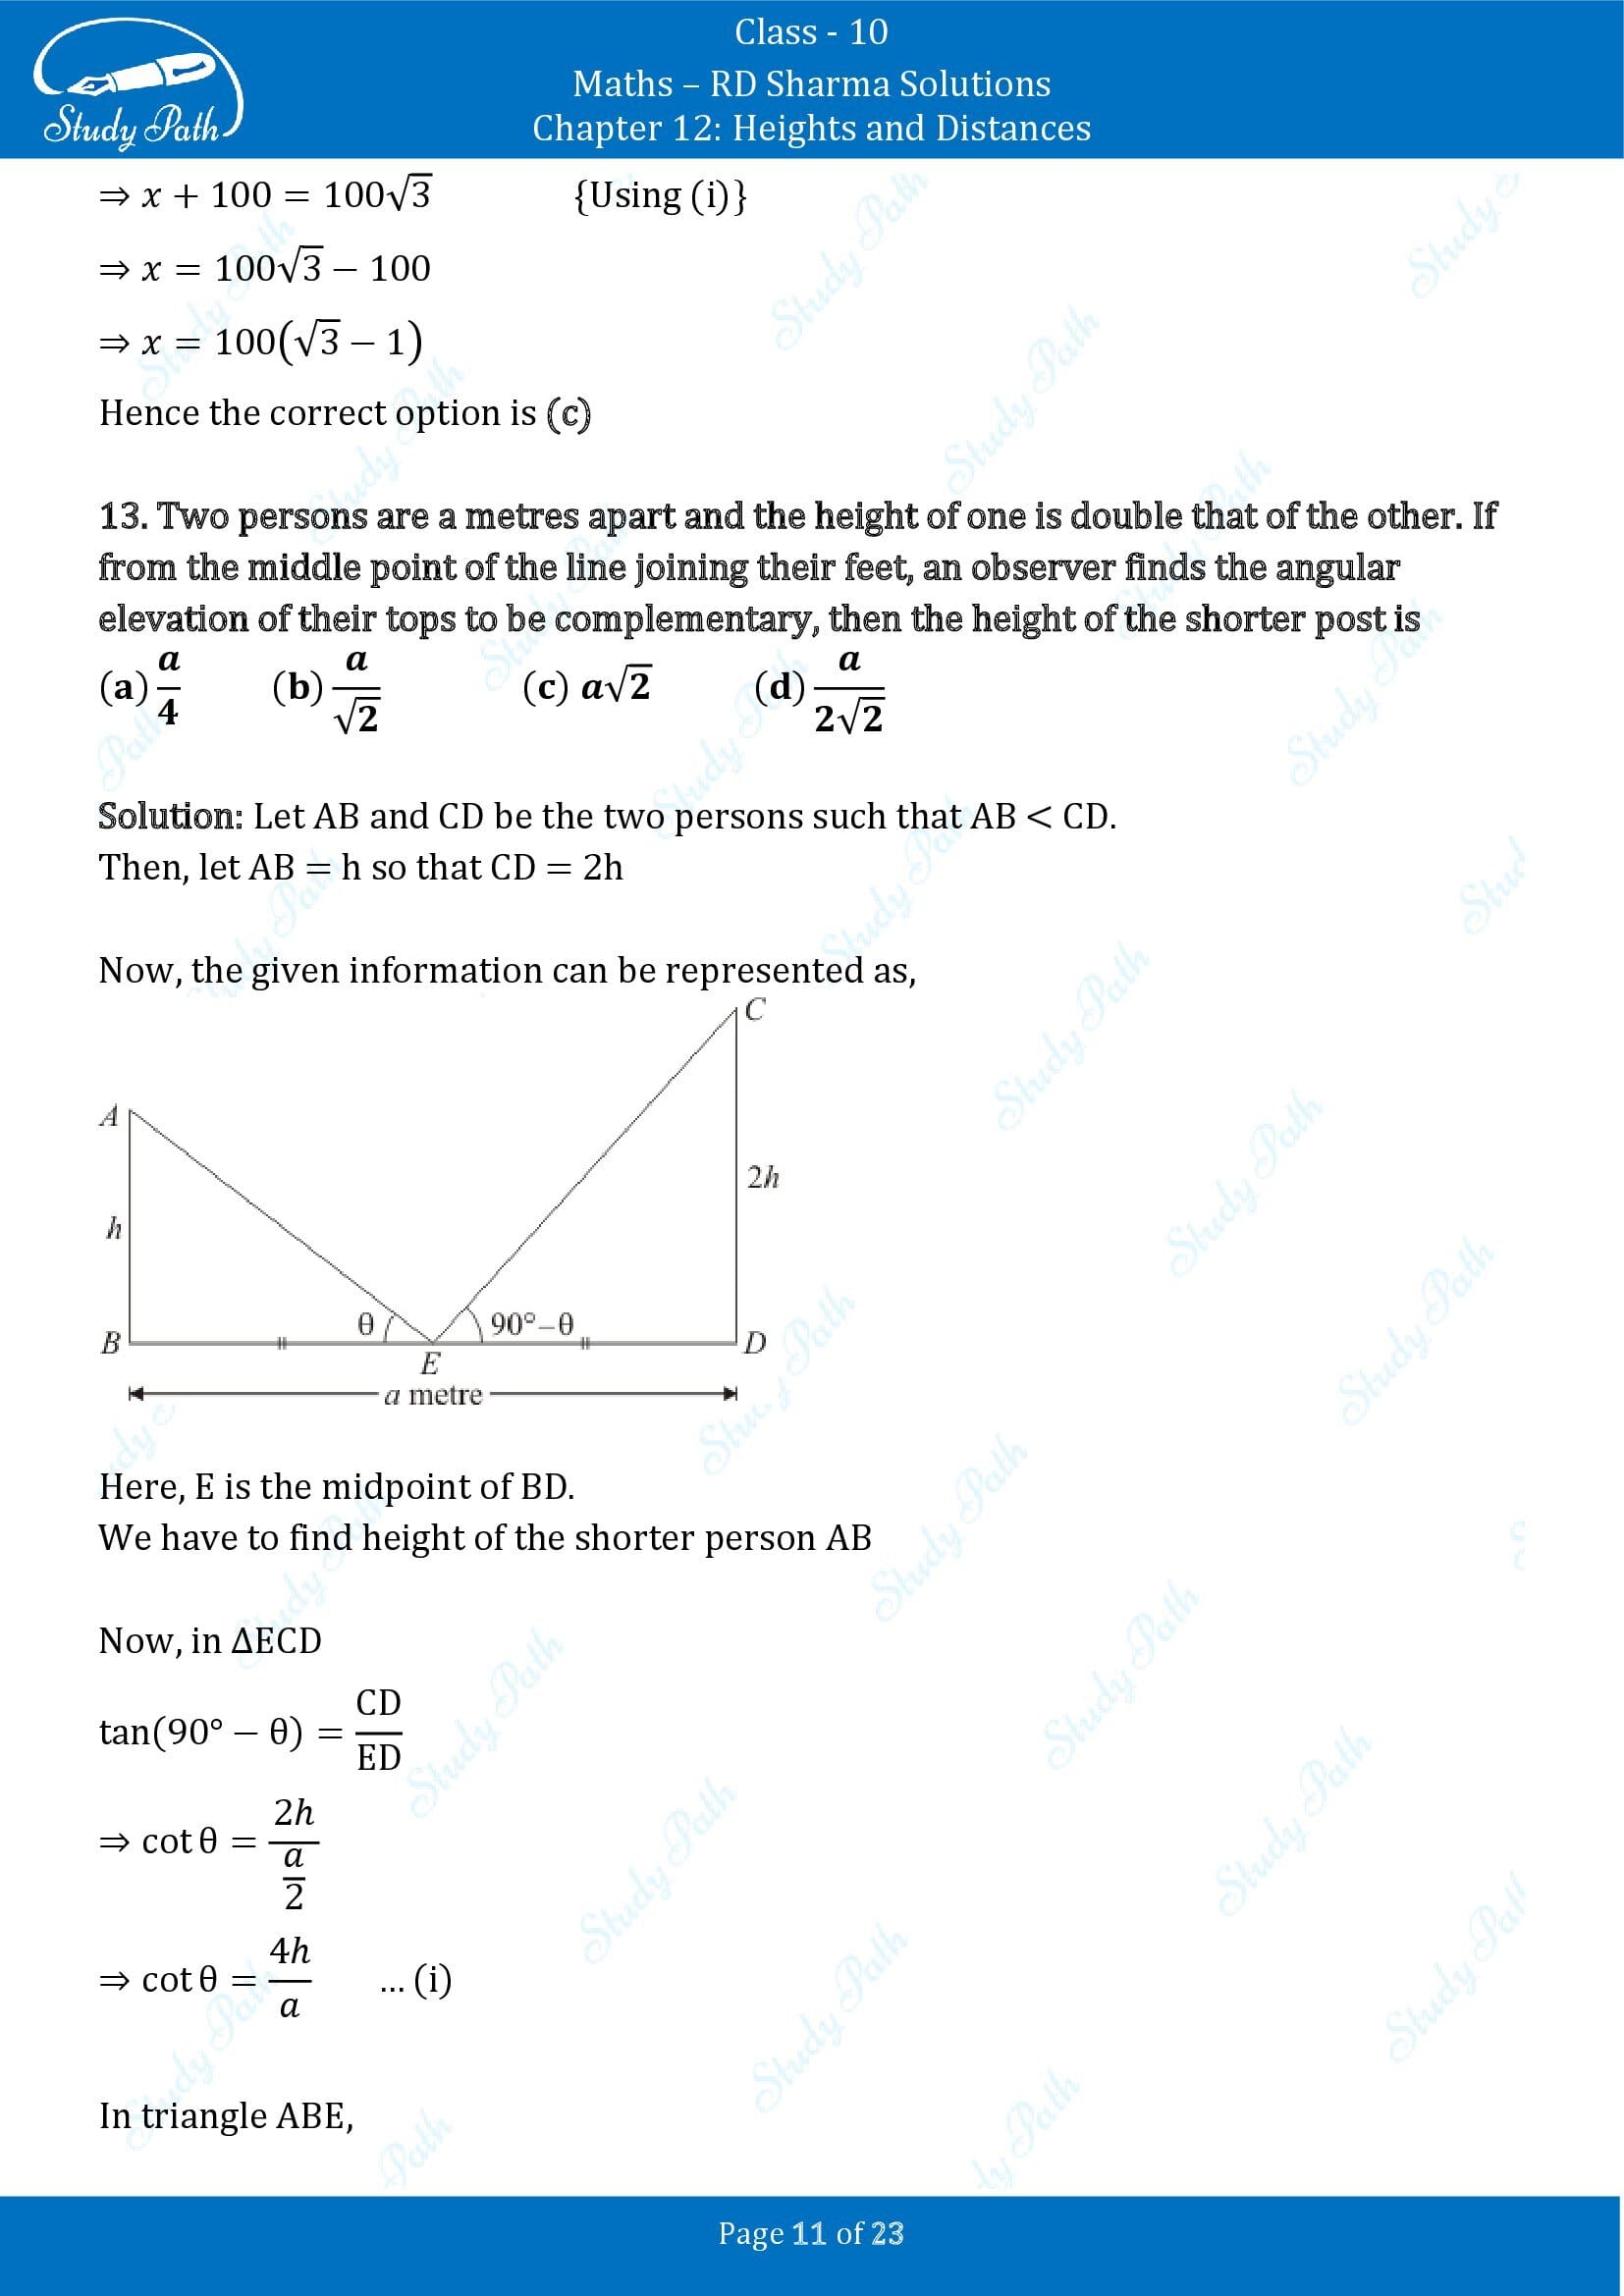 RD Sharma Solutions Class 10 Chapter 12 Heights and Distances Multiple Choice Question MCQs 00011